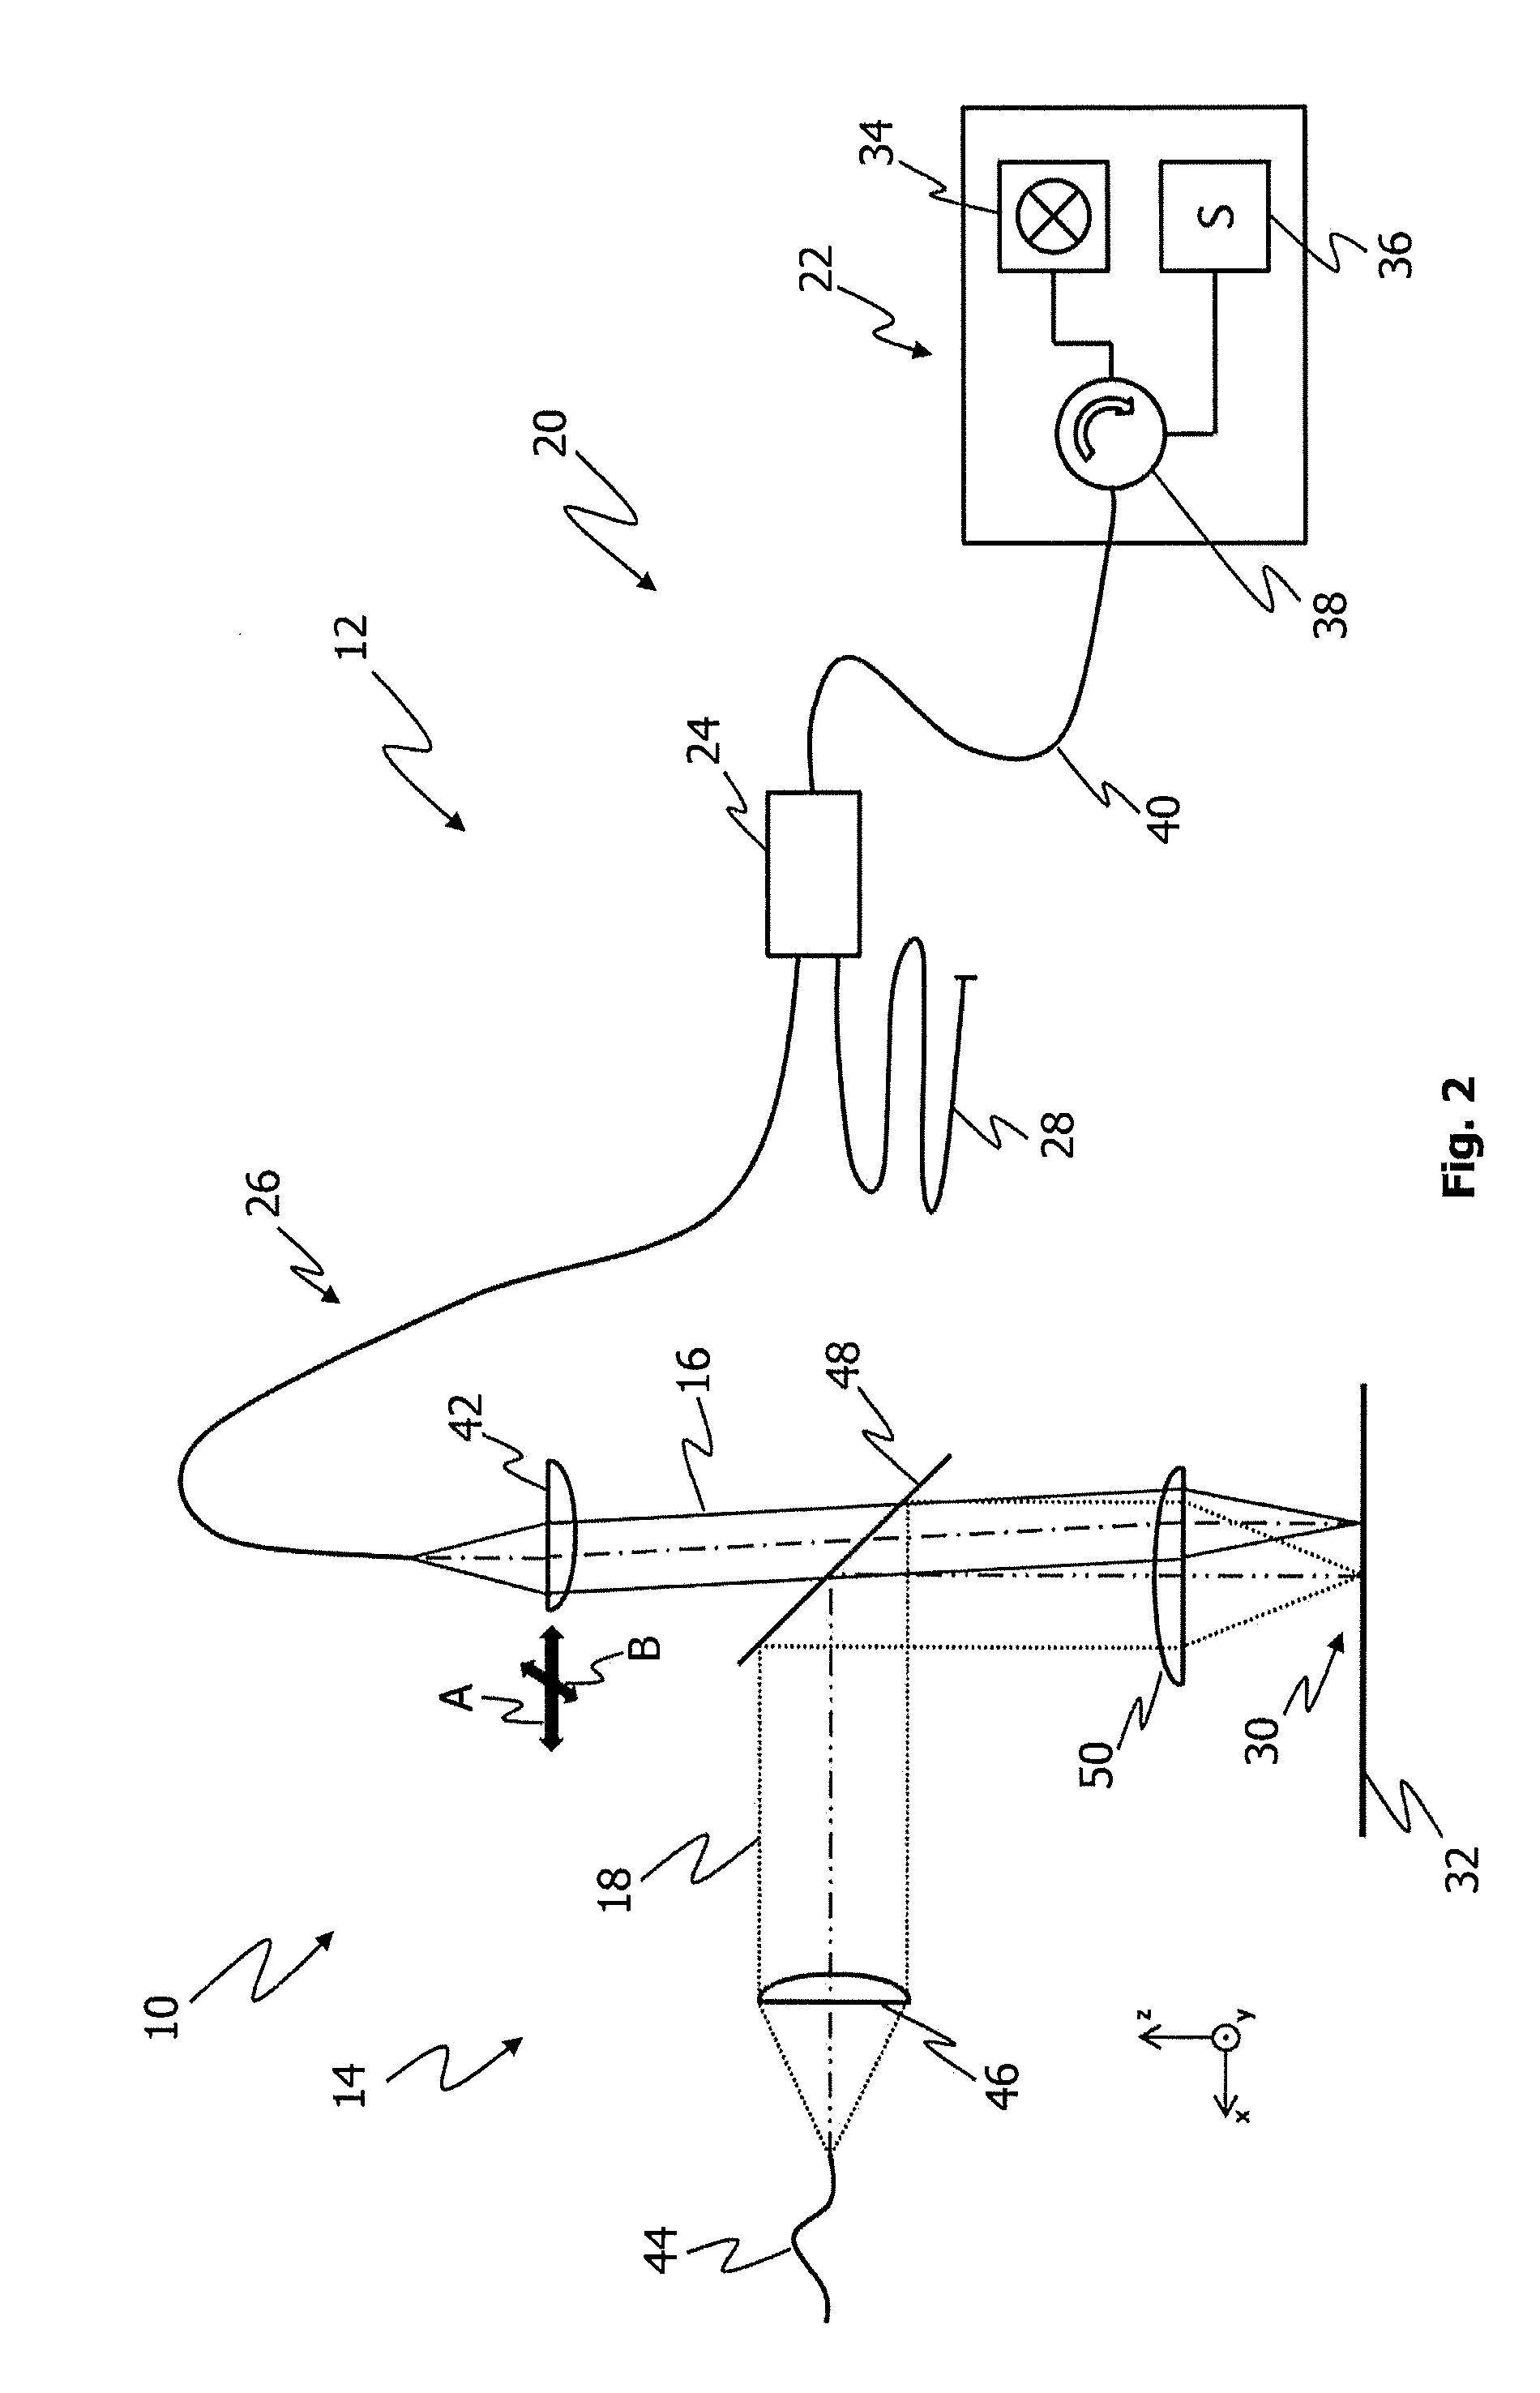 Measurement device for a laser processing system and a method for performing position measurements by means of a measurement beam on a workpiece